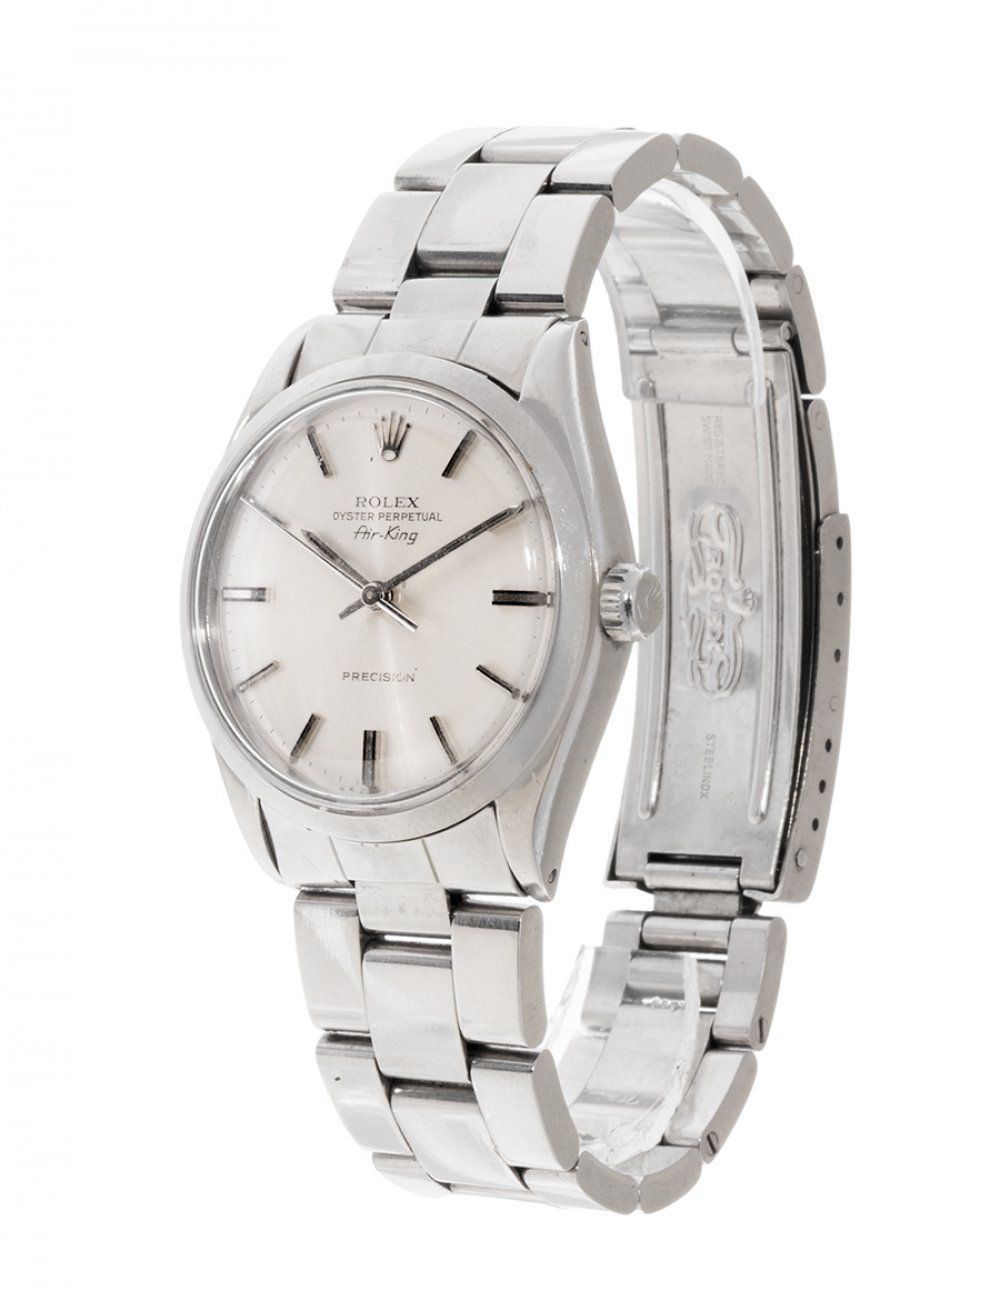 Null ROLEX Oyster Perpetual AIR KING Uhr, unisex. Serie 5500. Ca. 1983. Weißes Z&hellip;